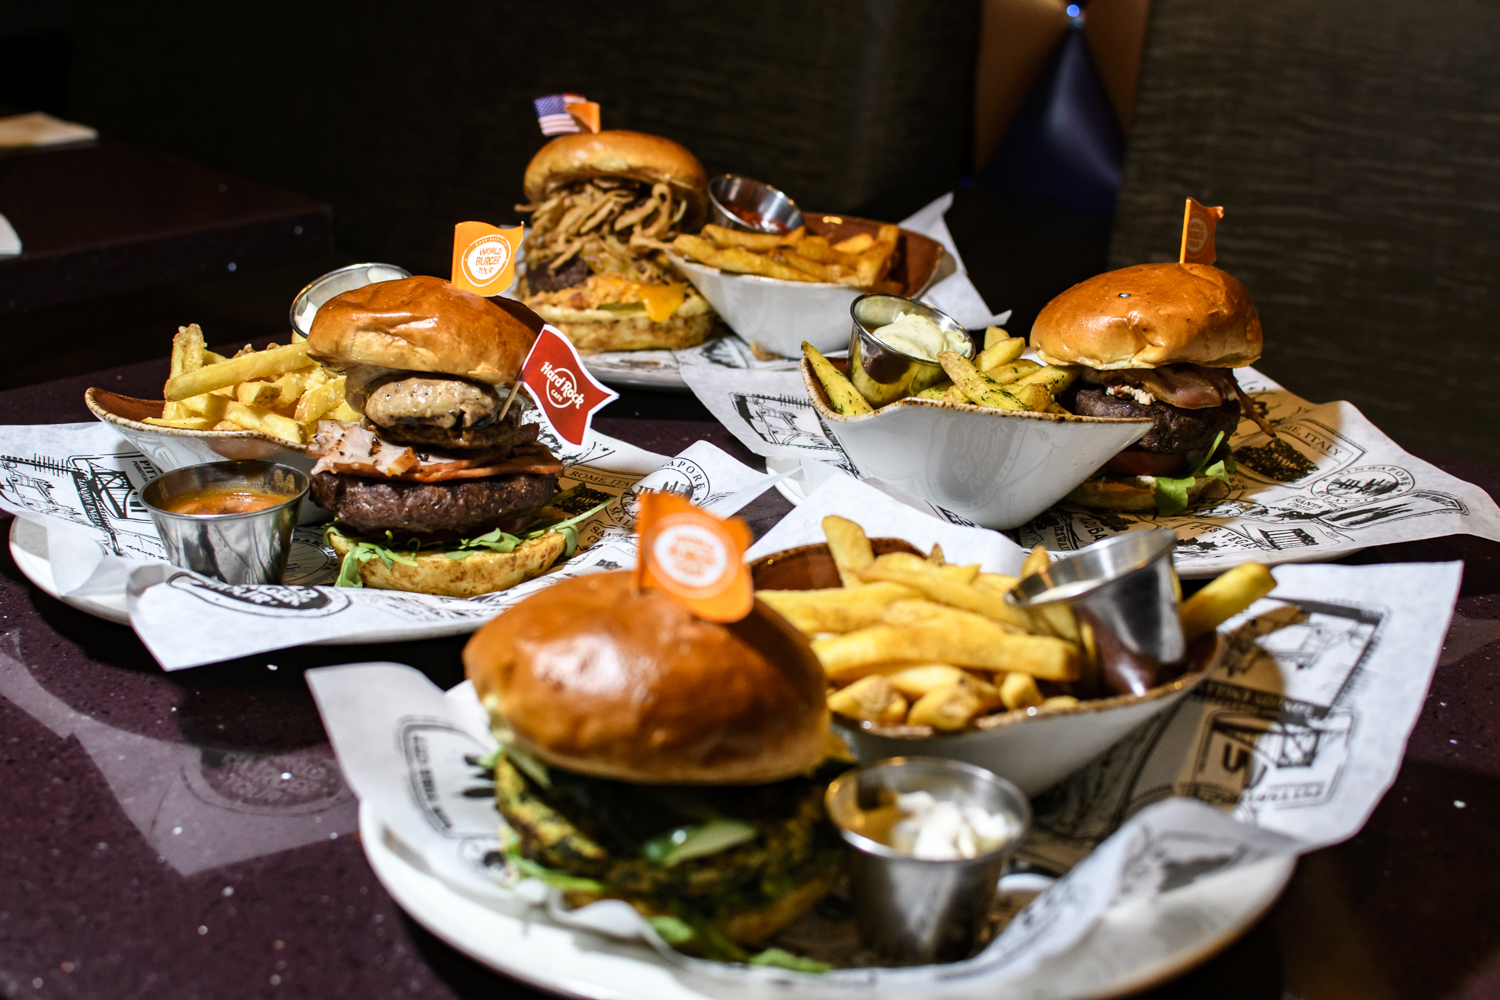 Budapest’s Hard Rock Cafe now offers four new worldly burgers